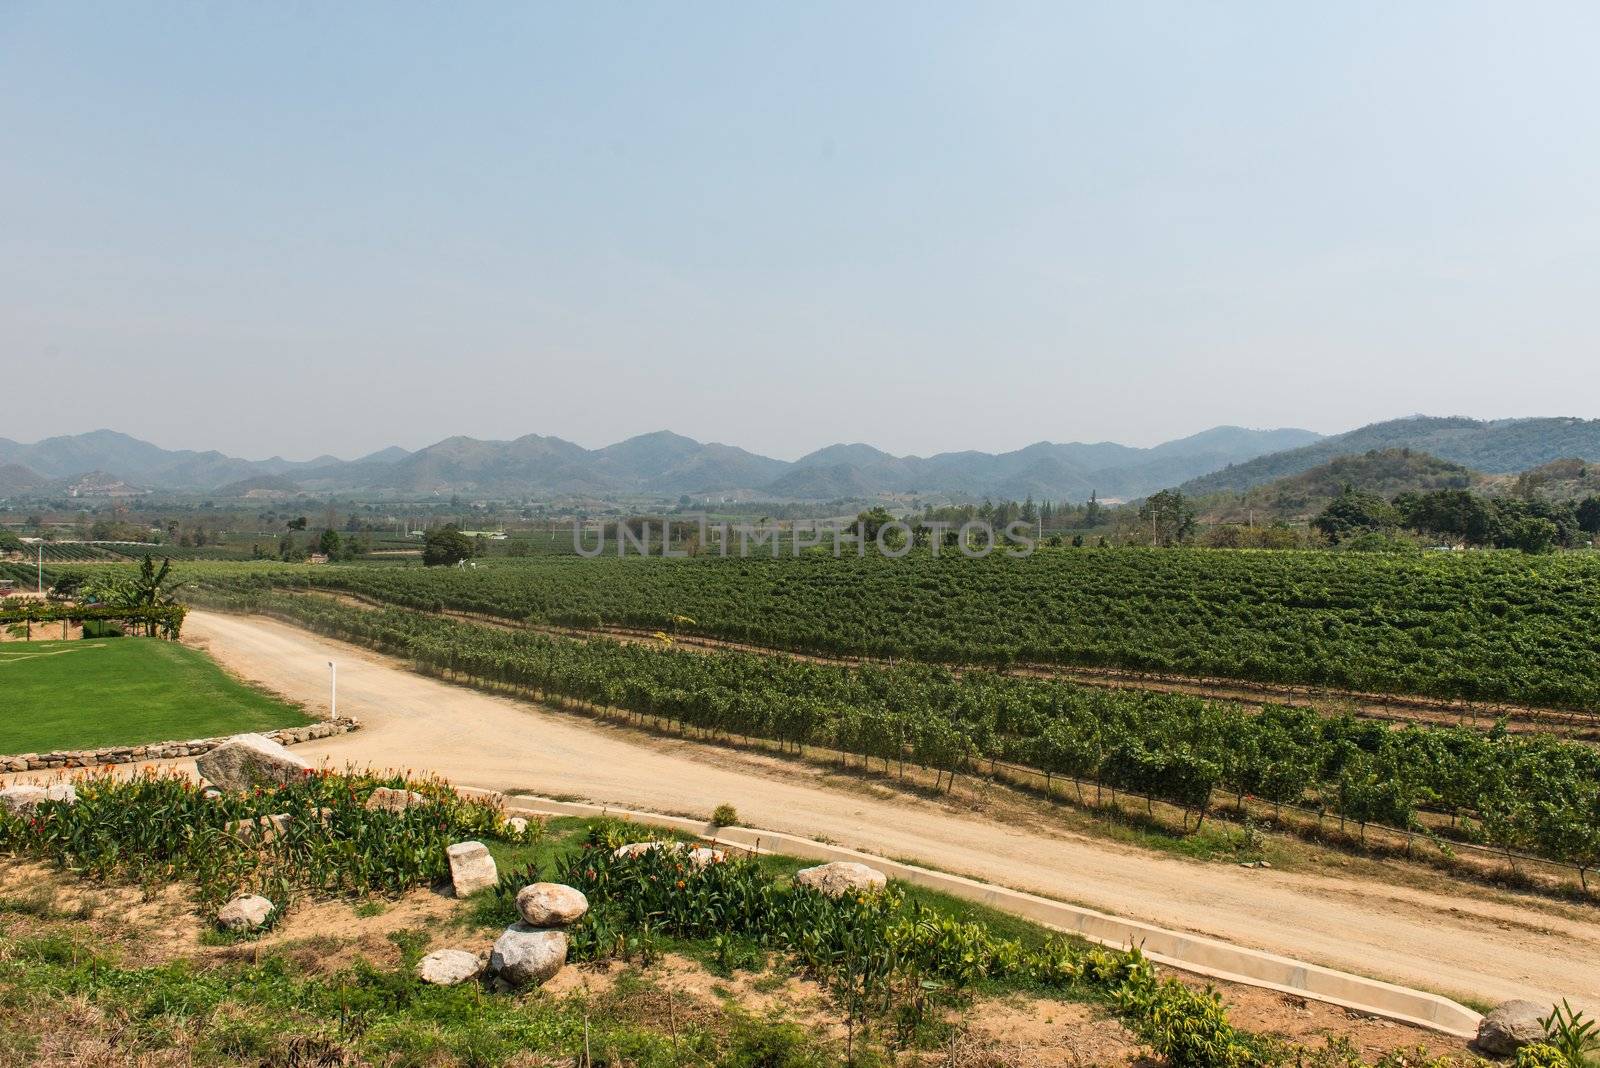 Grape wine vine yard green field in south of Thailand by sasilsolutions